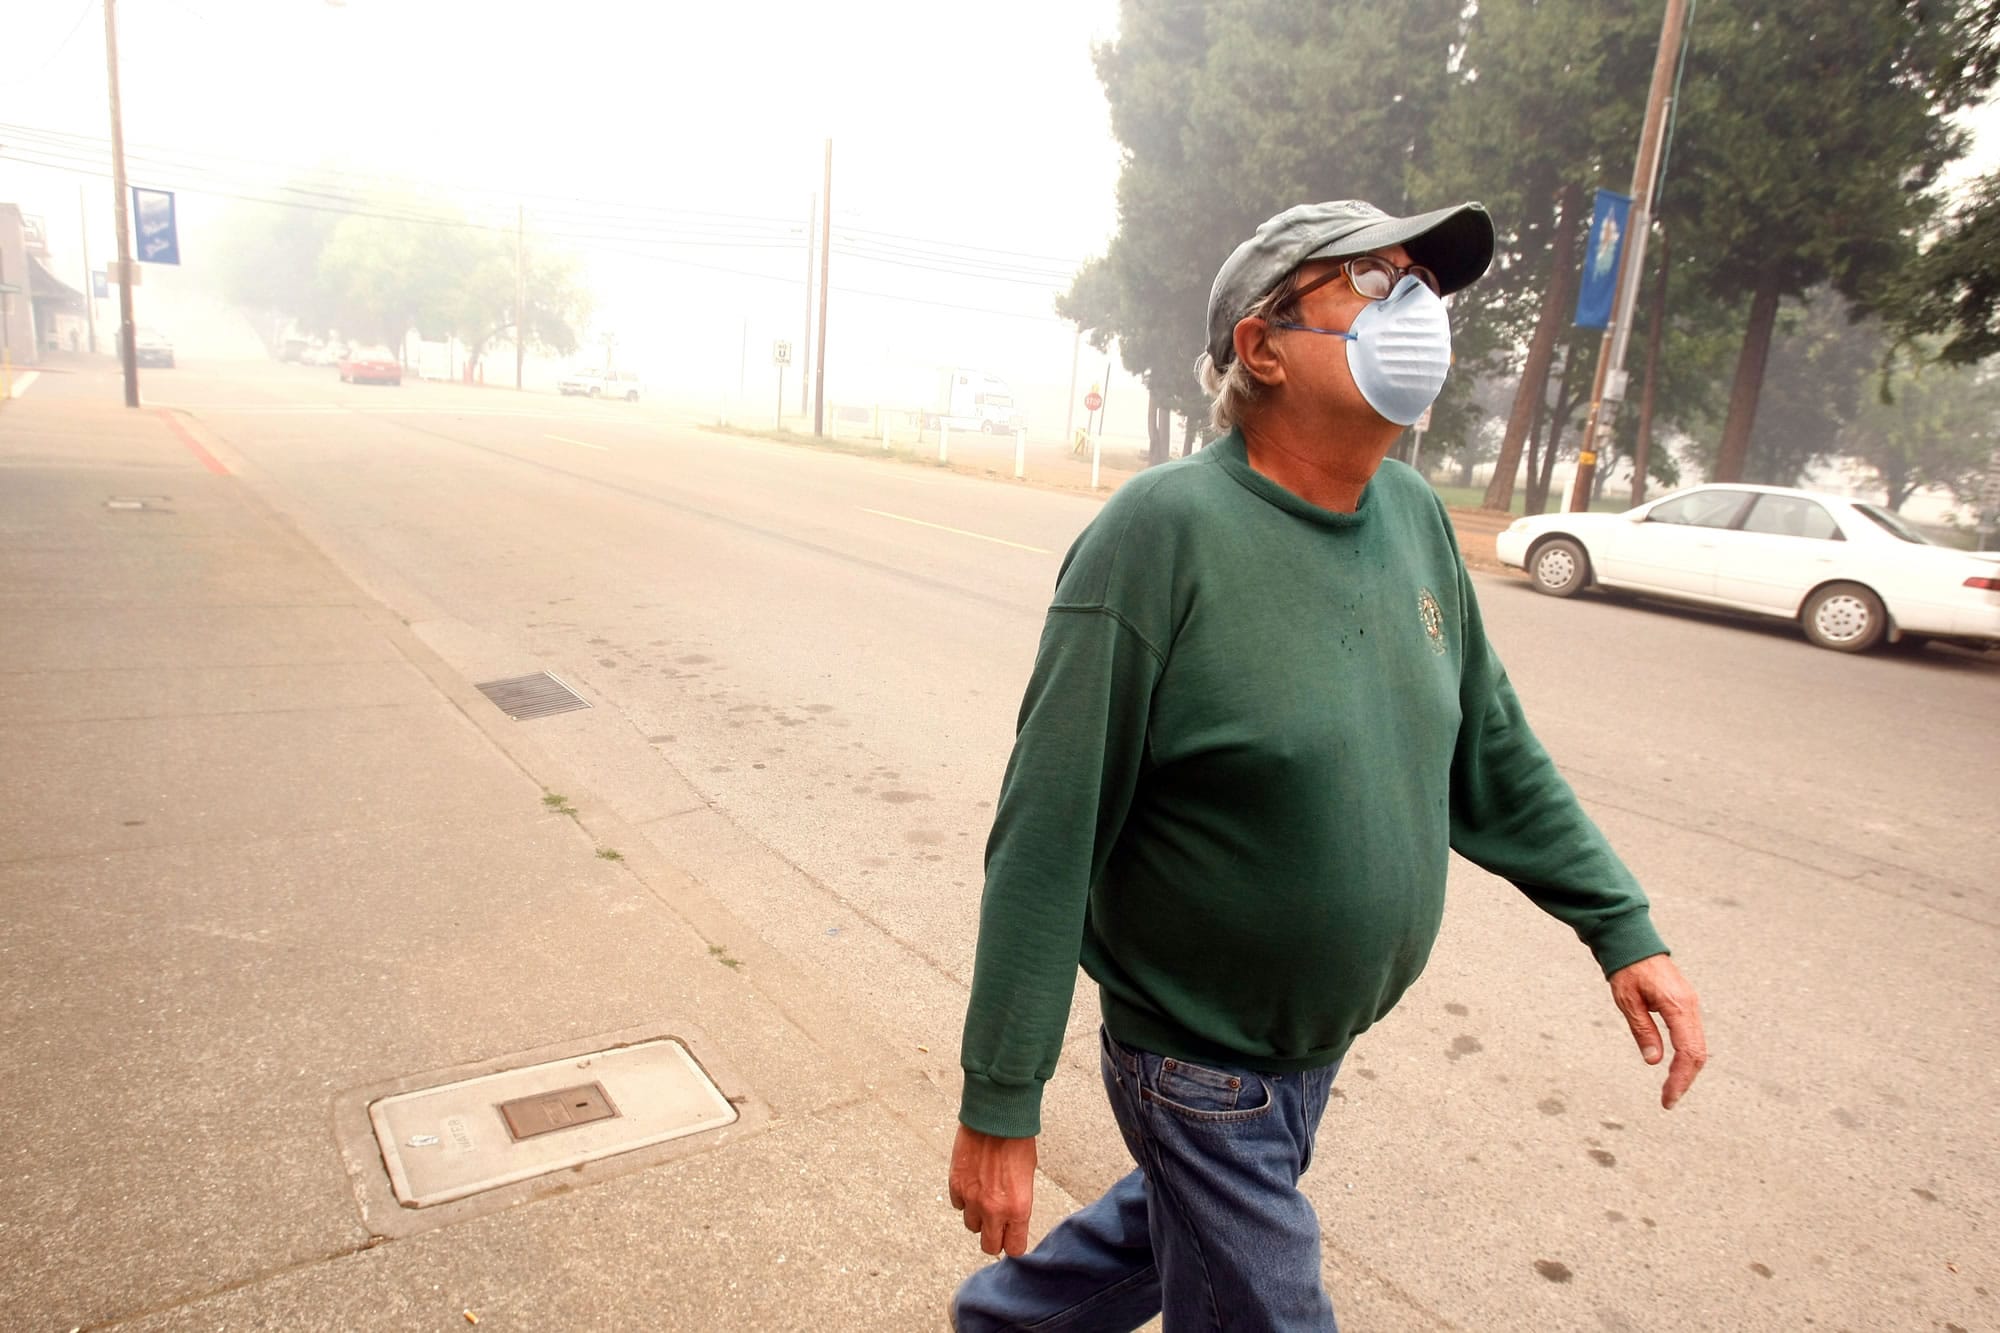 Jim Crouch wears a mask as he walks to the post office in Glendale, Ore., on Tuesday. Lightning late last week touched off dozens of fires in southwest Oregon near Glendale.